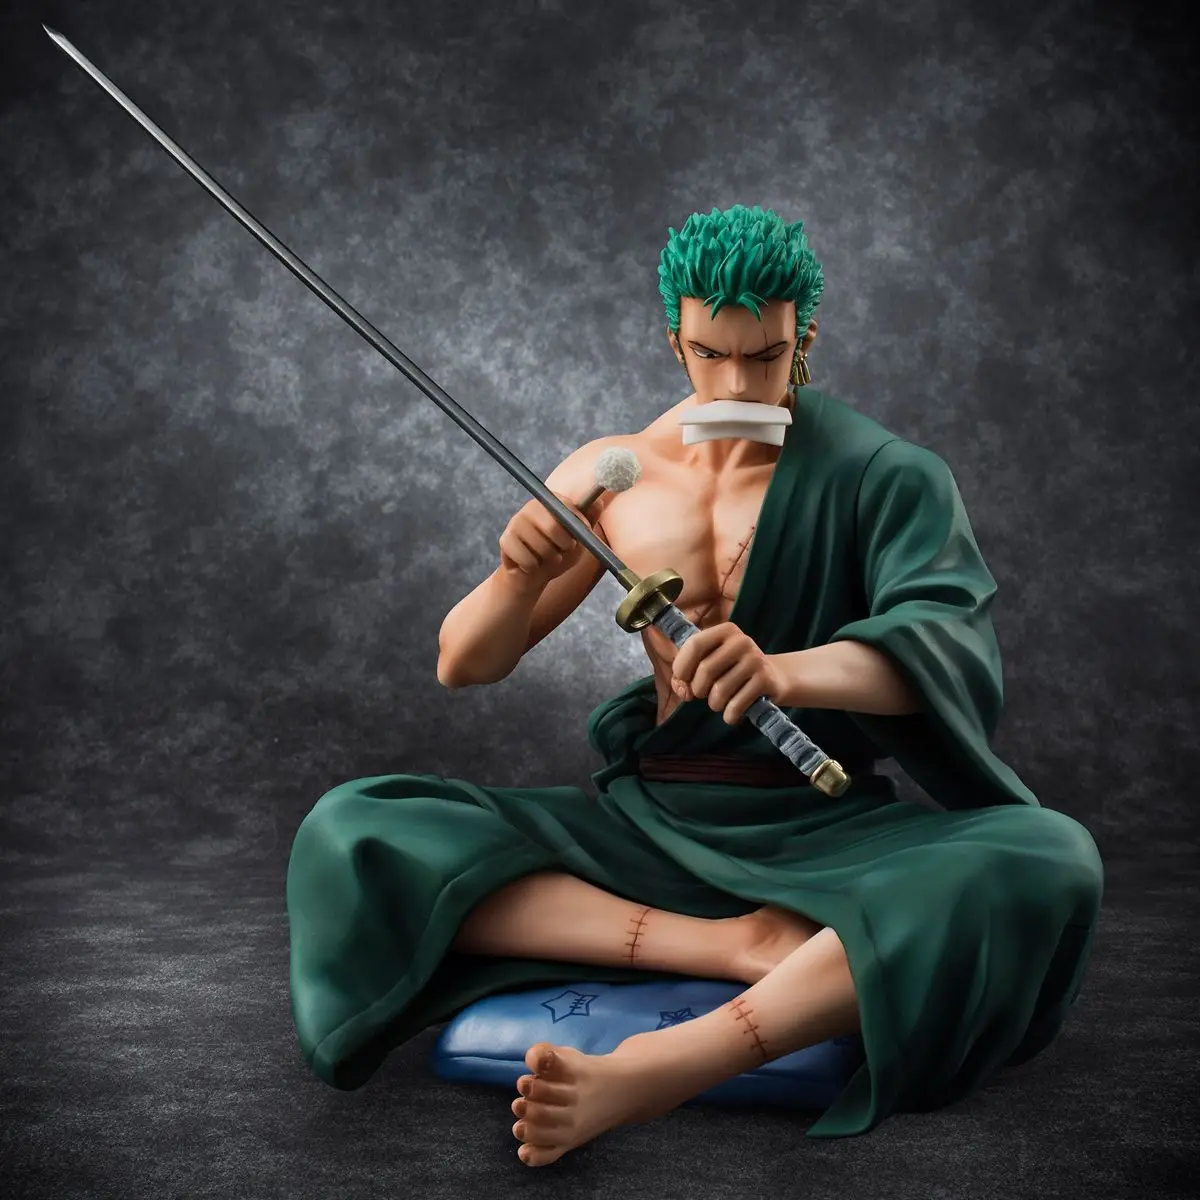 Japan Anime One Piece P.O.P Zoro Sitting Ver. PVC 13cm Action Figure Gift Collectible Model Toys